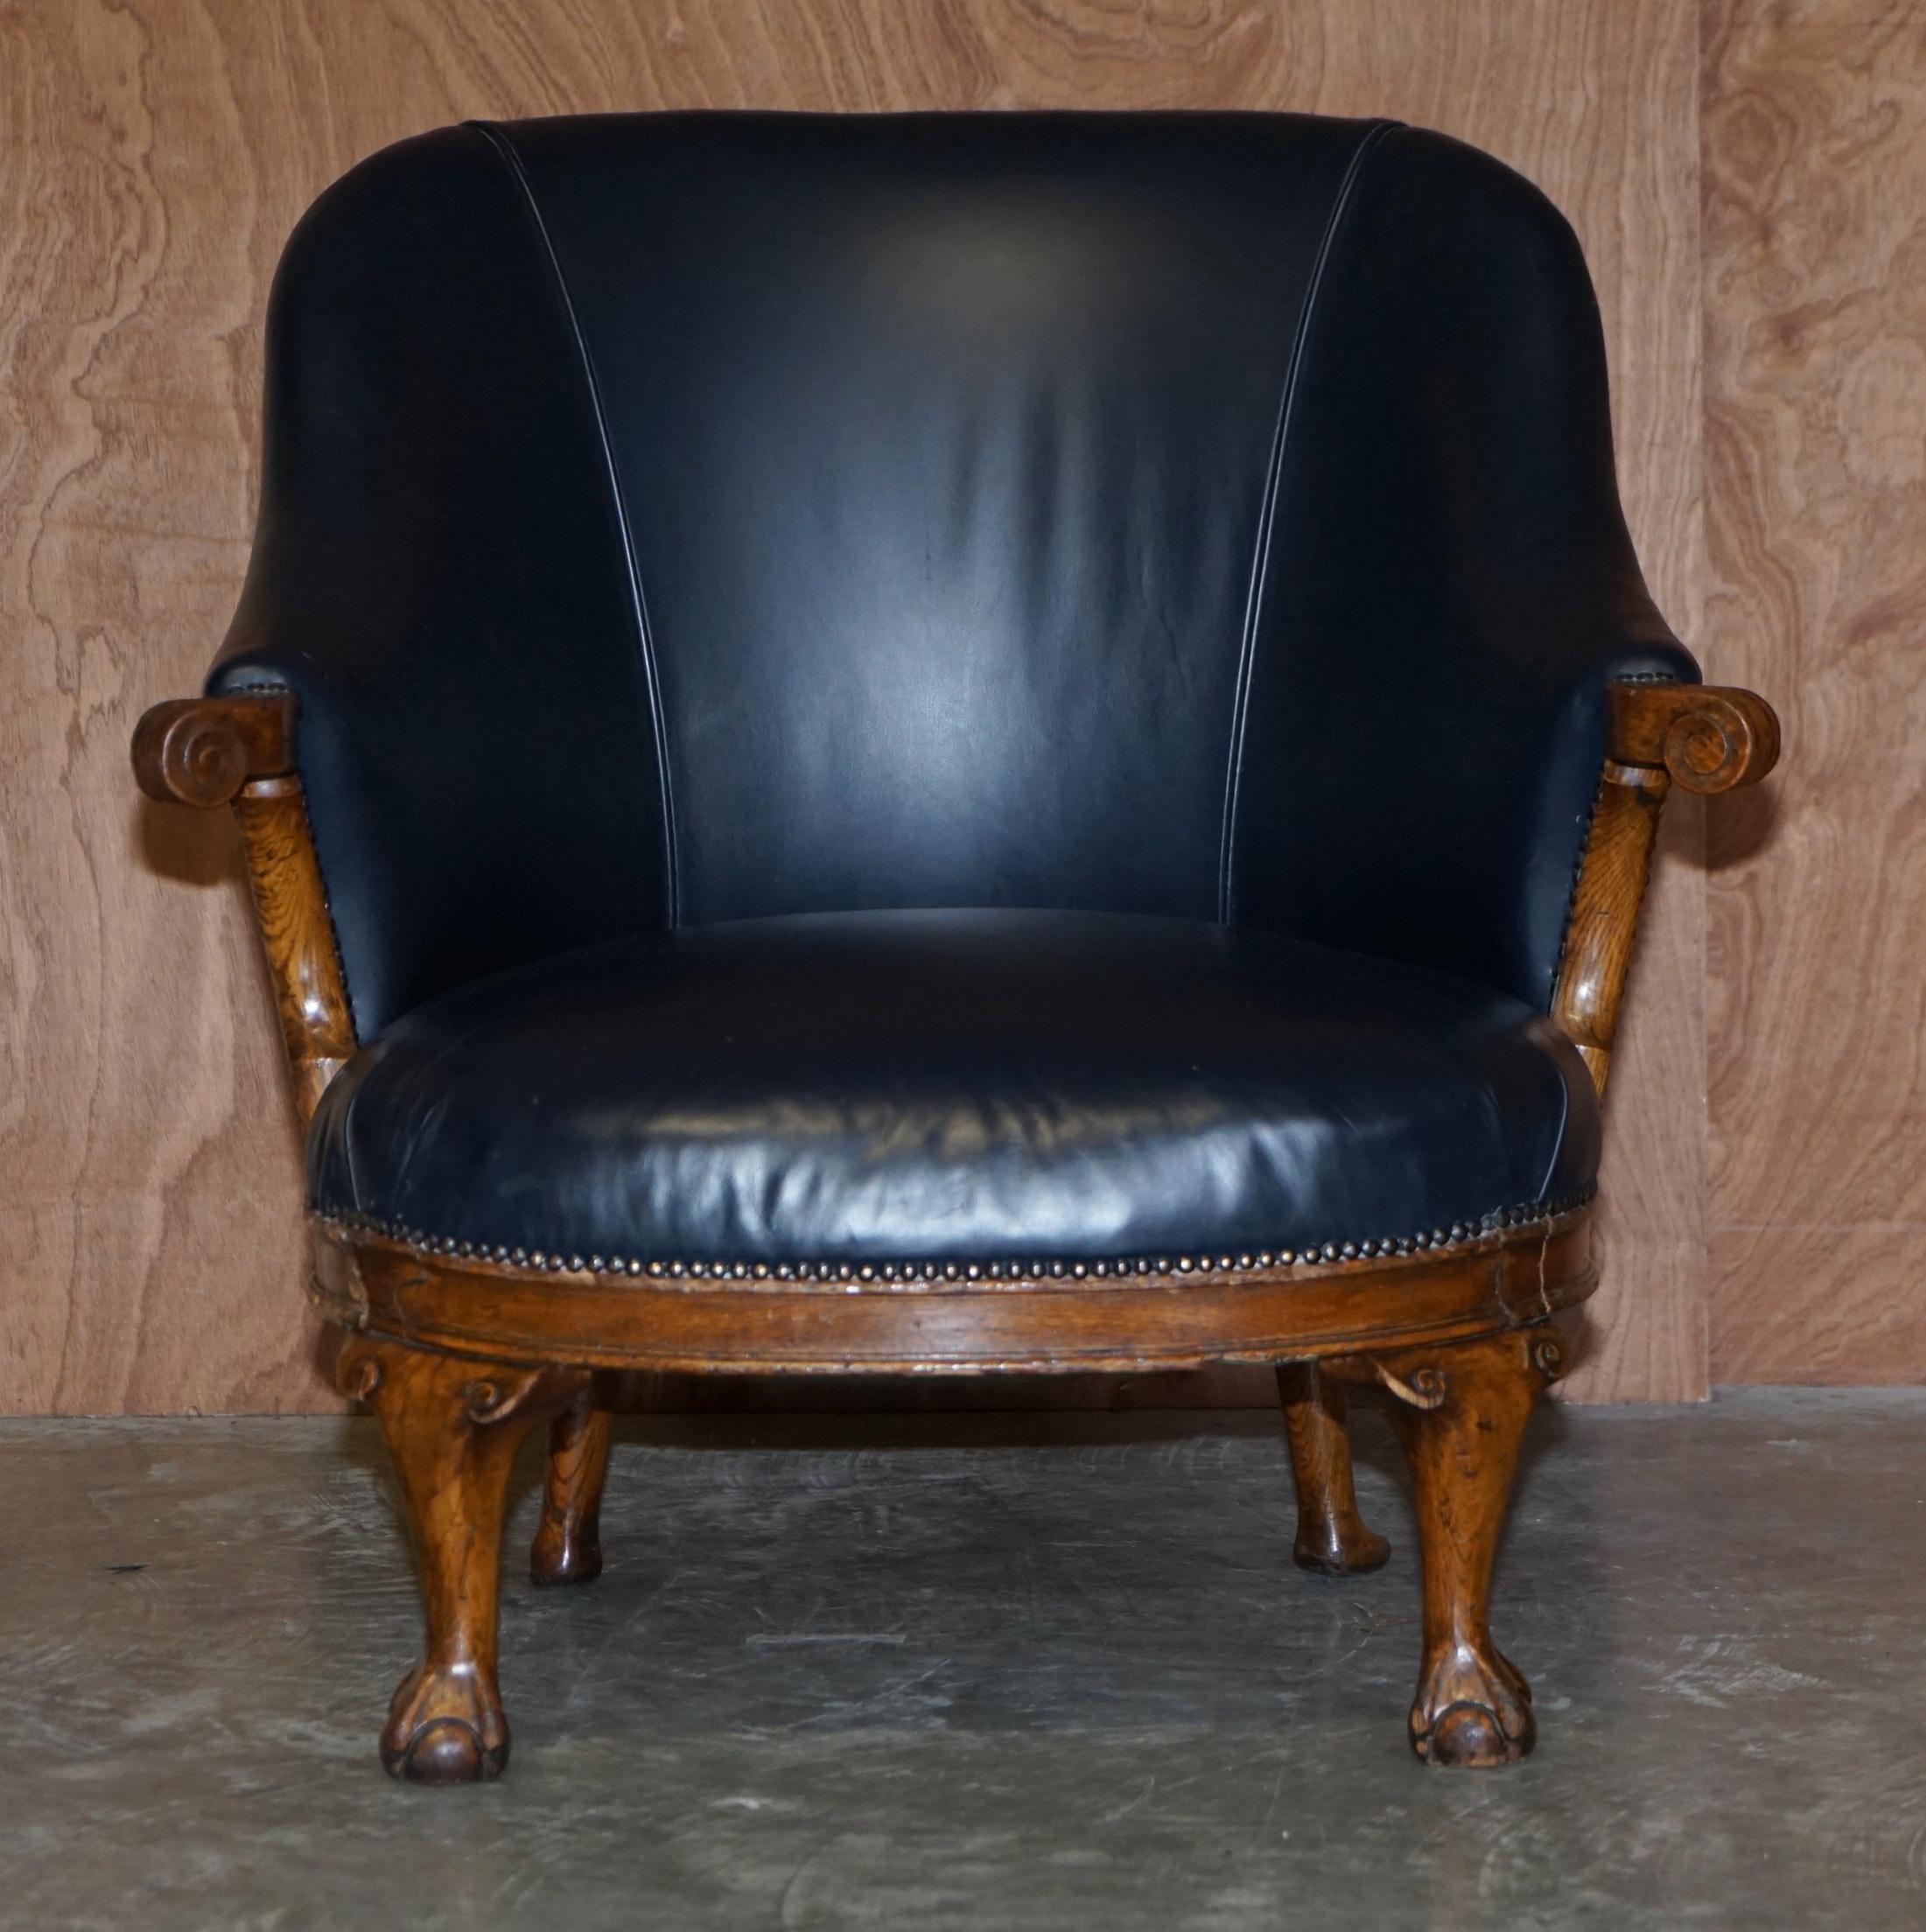 We are delighted to offer this lovely hand made in England Regency circa 1810-1820 oak framed Gentleman’s tub armchair with Royal blue leather upholstery

A very good looking and decorative piece, in truth, I have not seen an armchair with these